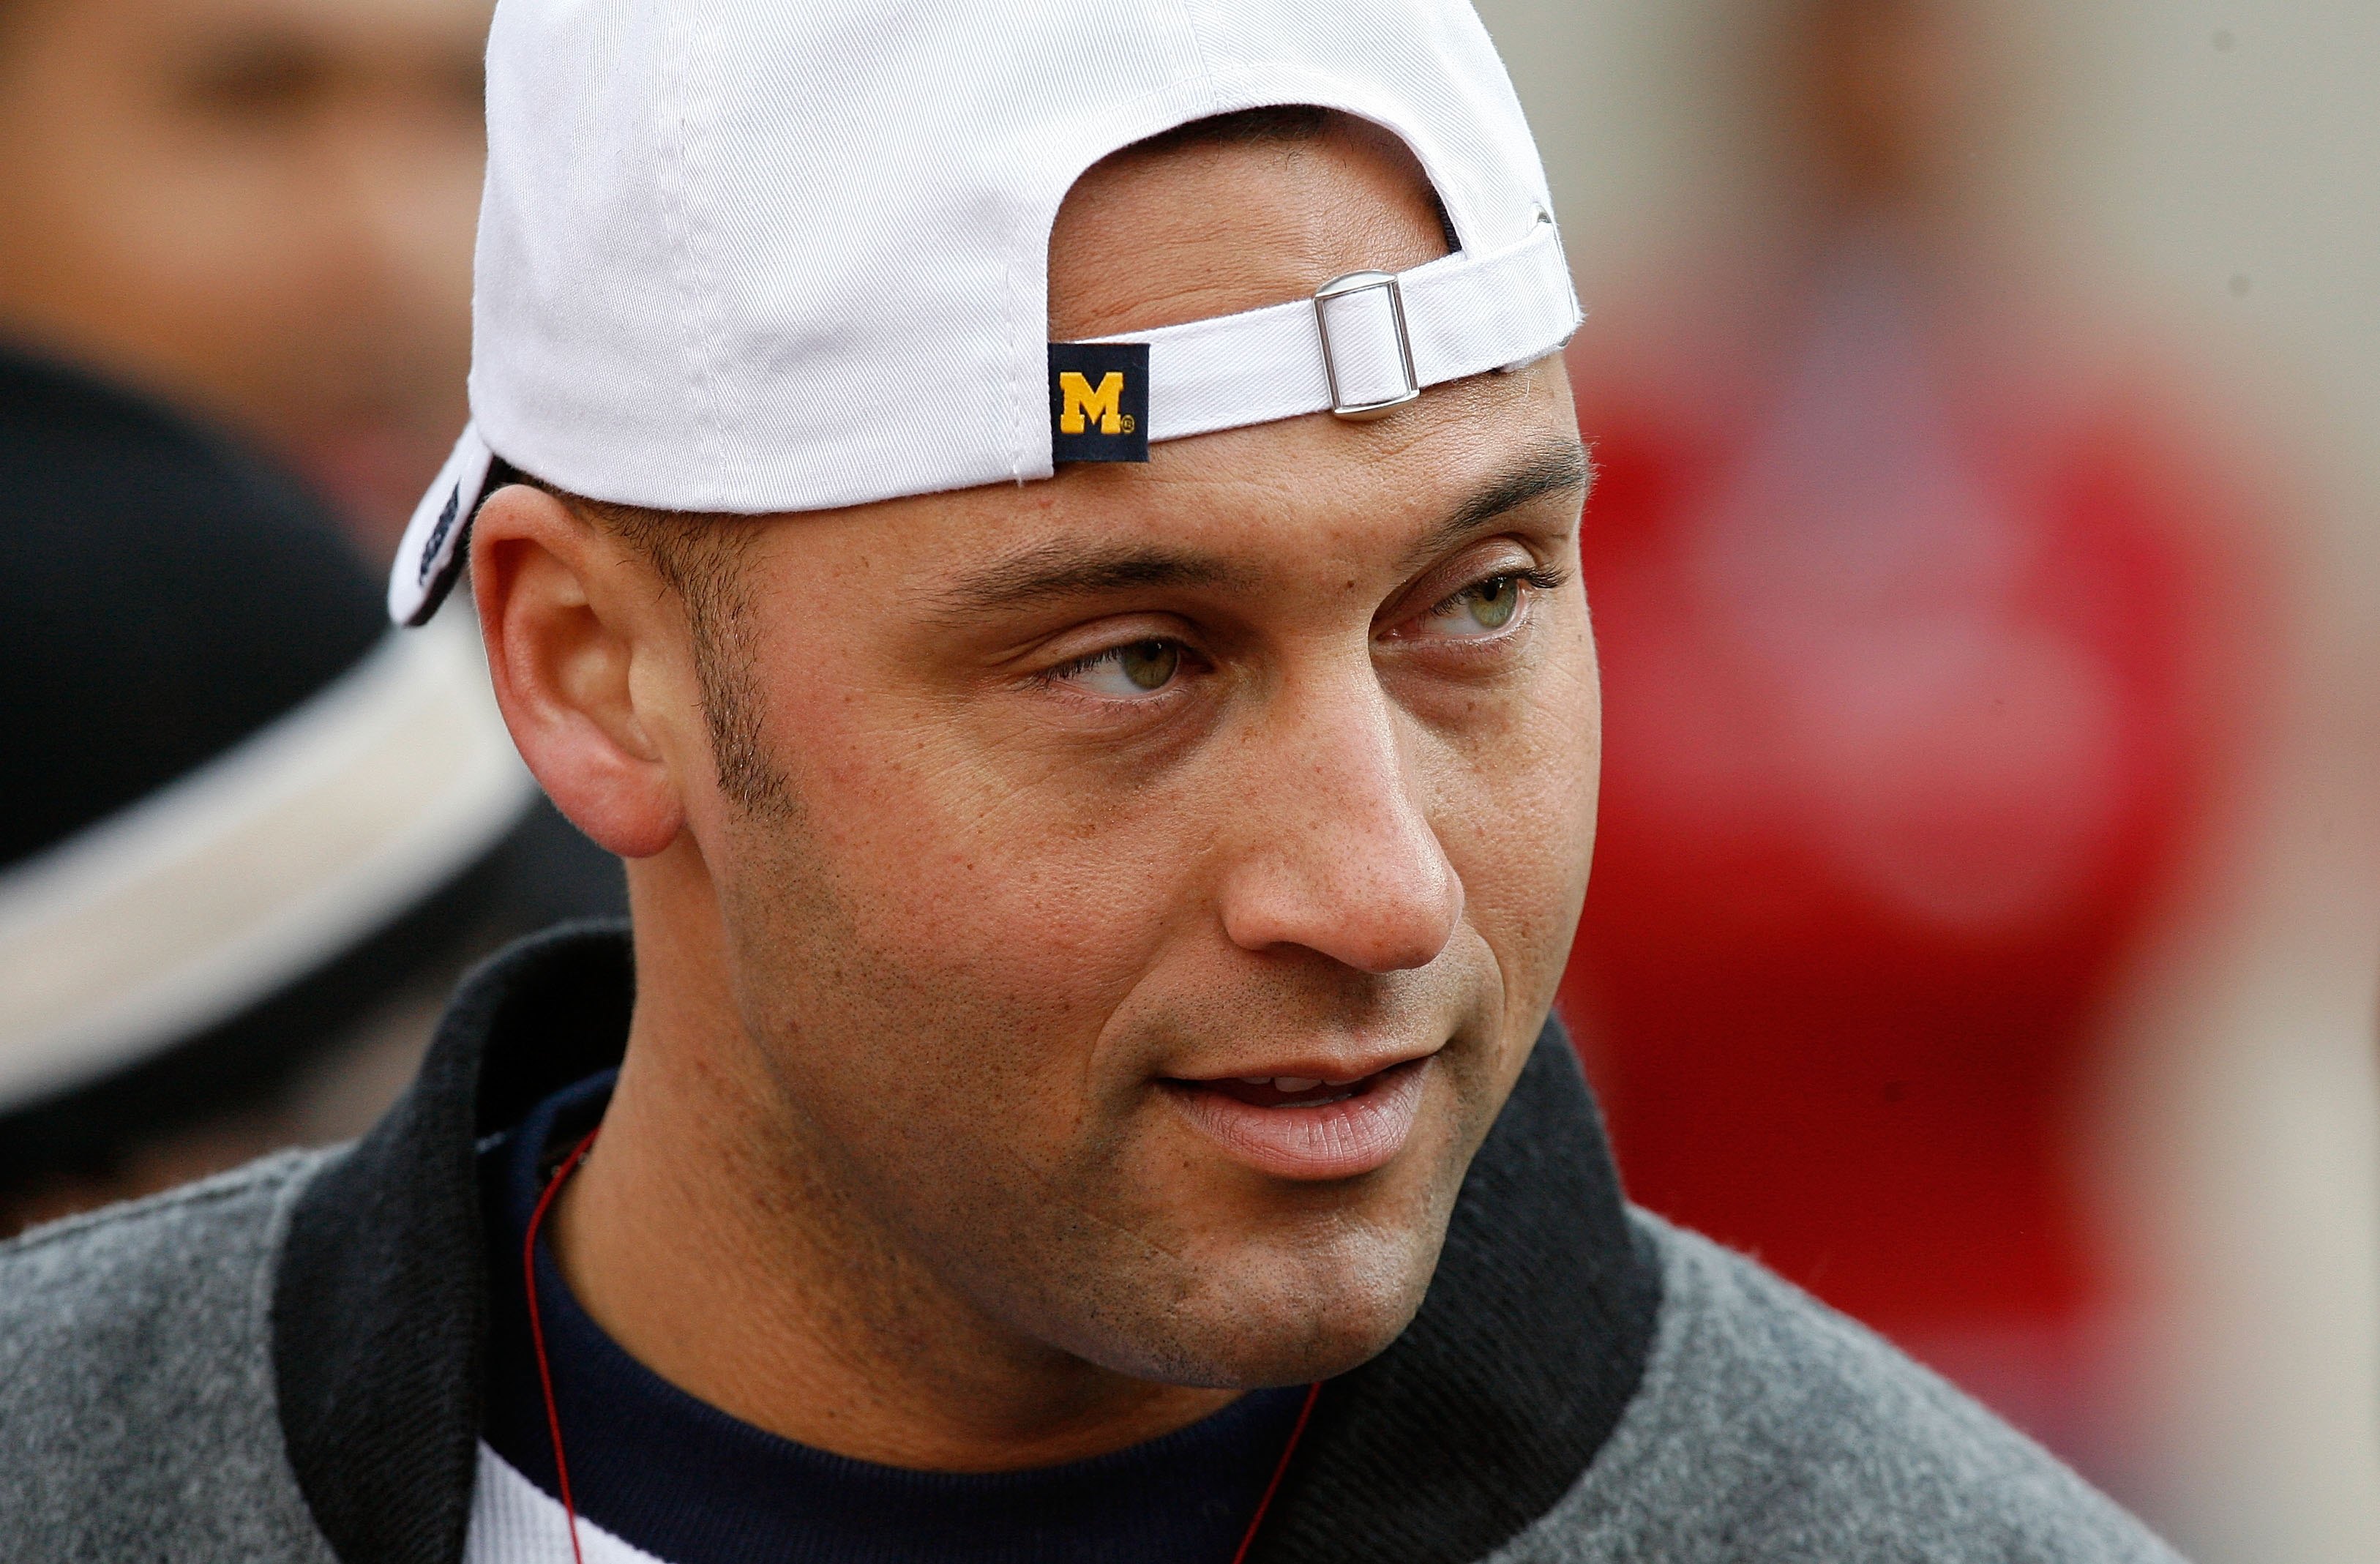 Derek Jeter watches a Michigan game from the sideline on November 18, 2006.  (Photo by Gregory Shamus/Getty Images)